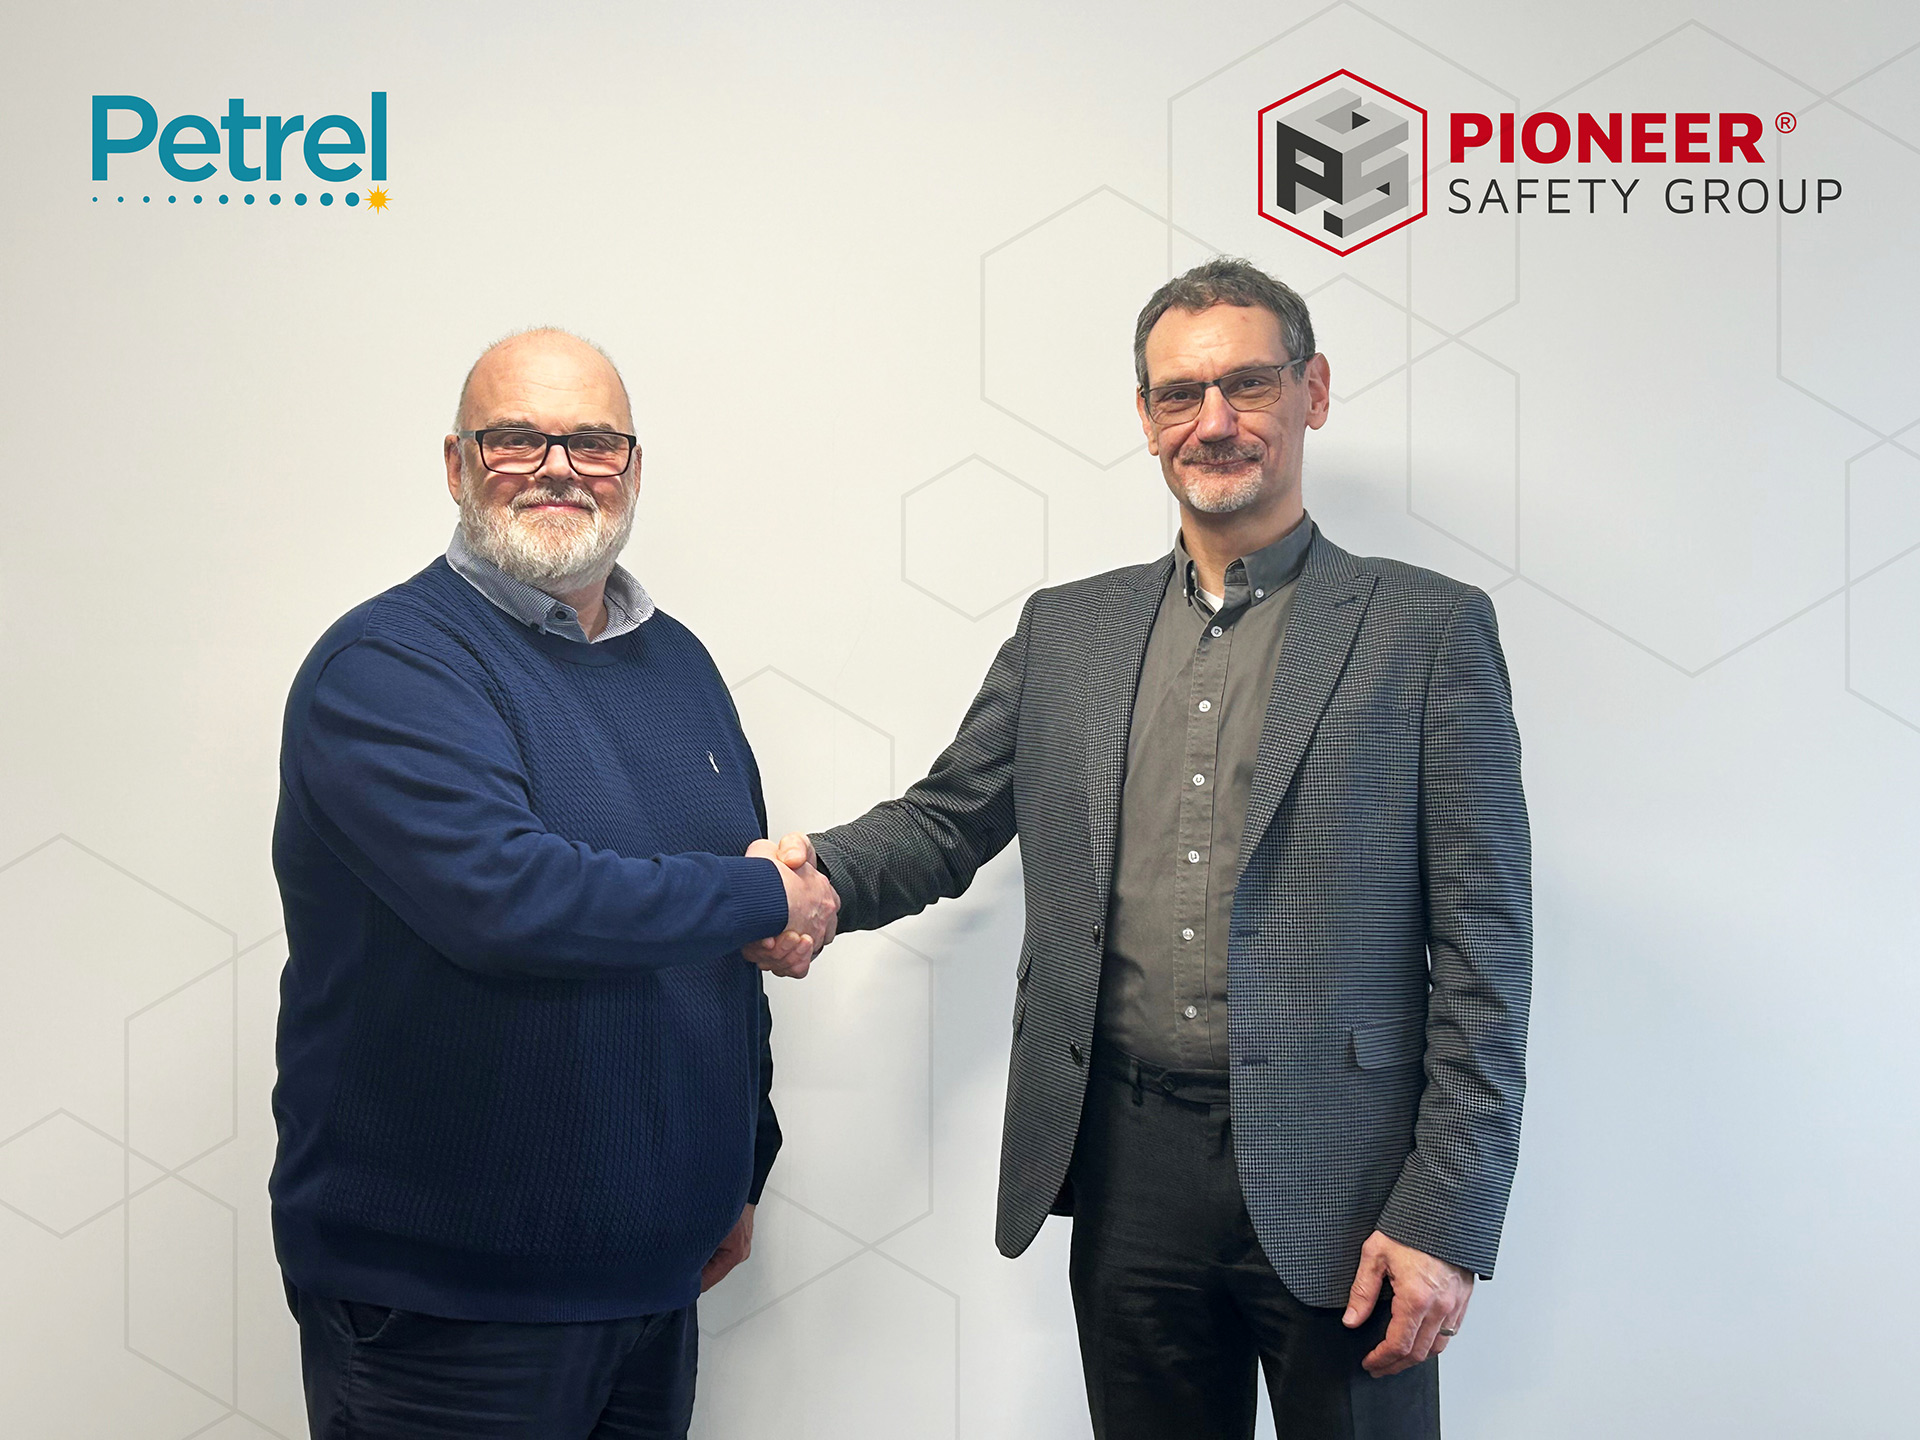 Mark Pemberton, Petrel and Steve Noakes, Pioneer Safety Group shortly after acquisition